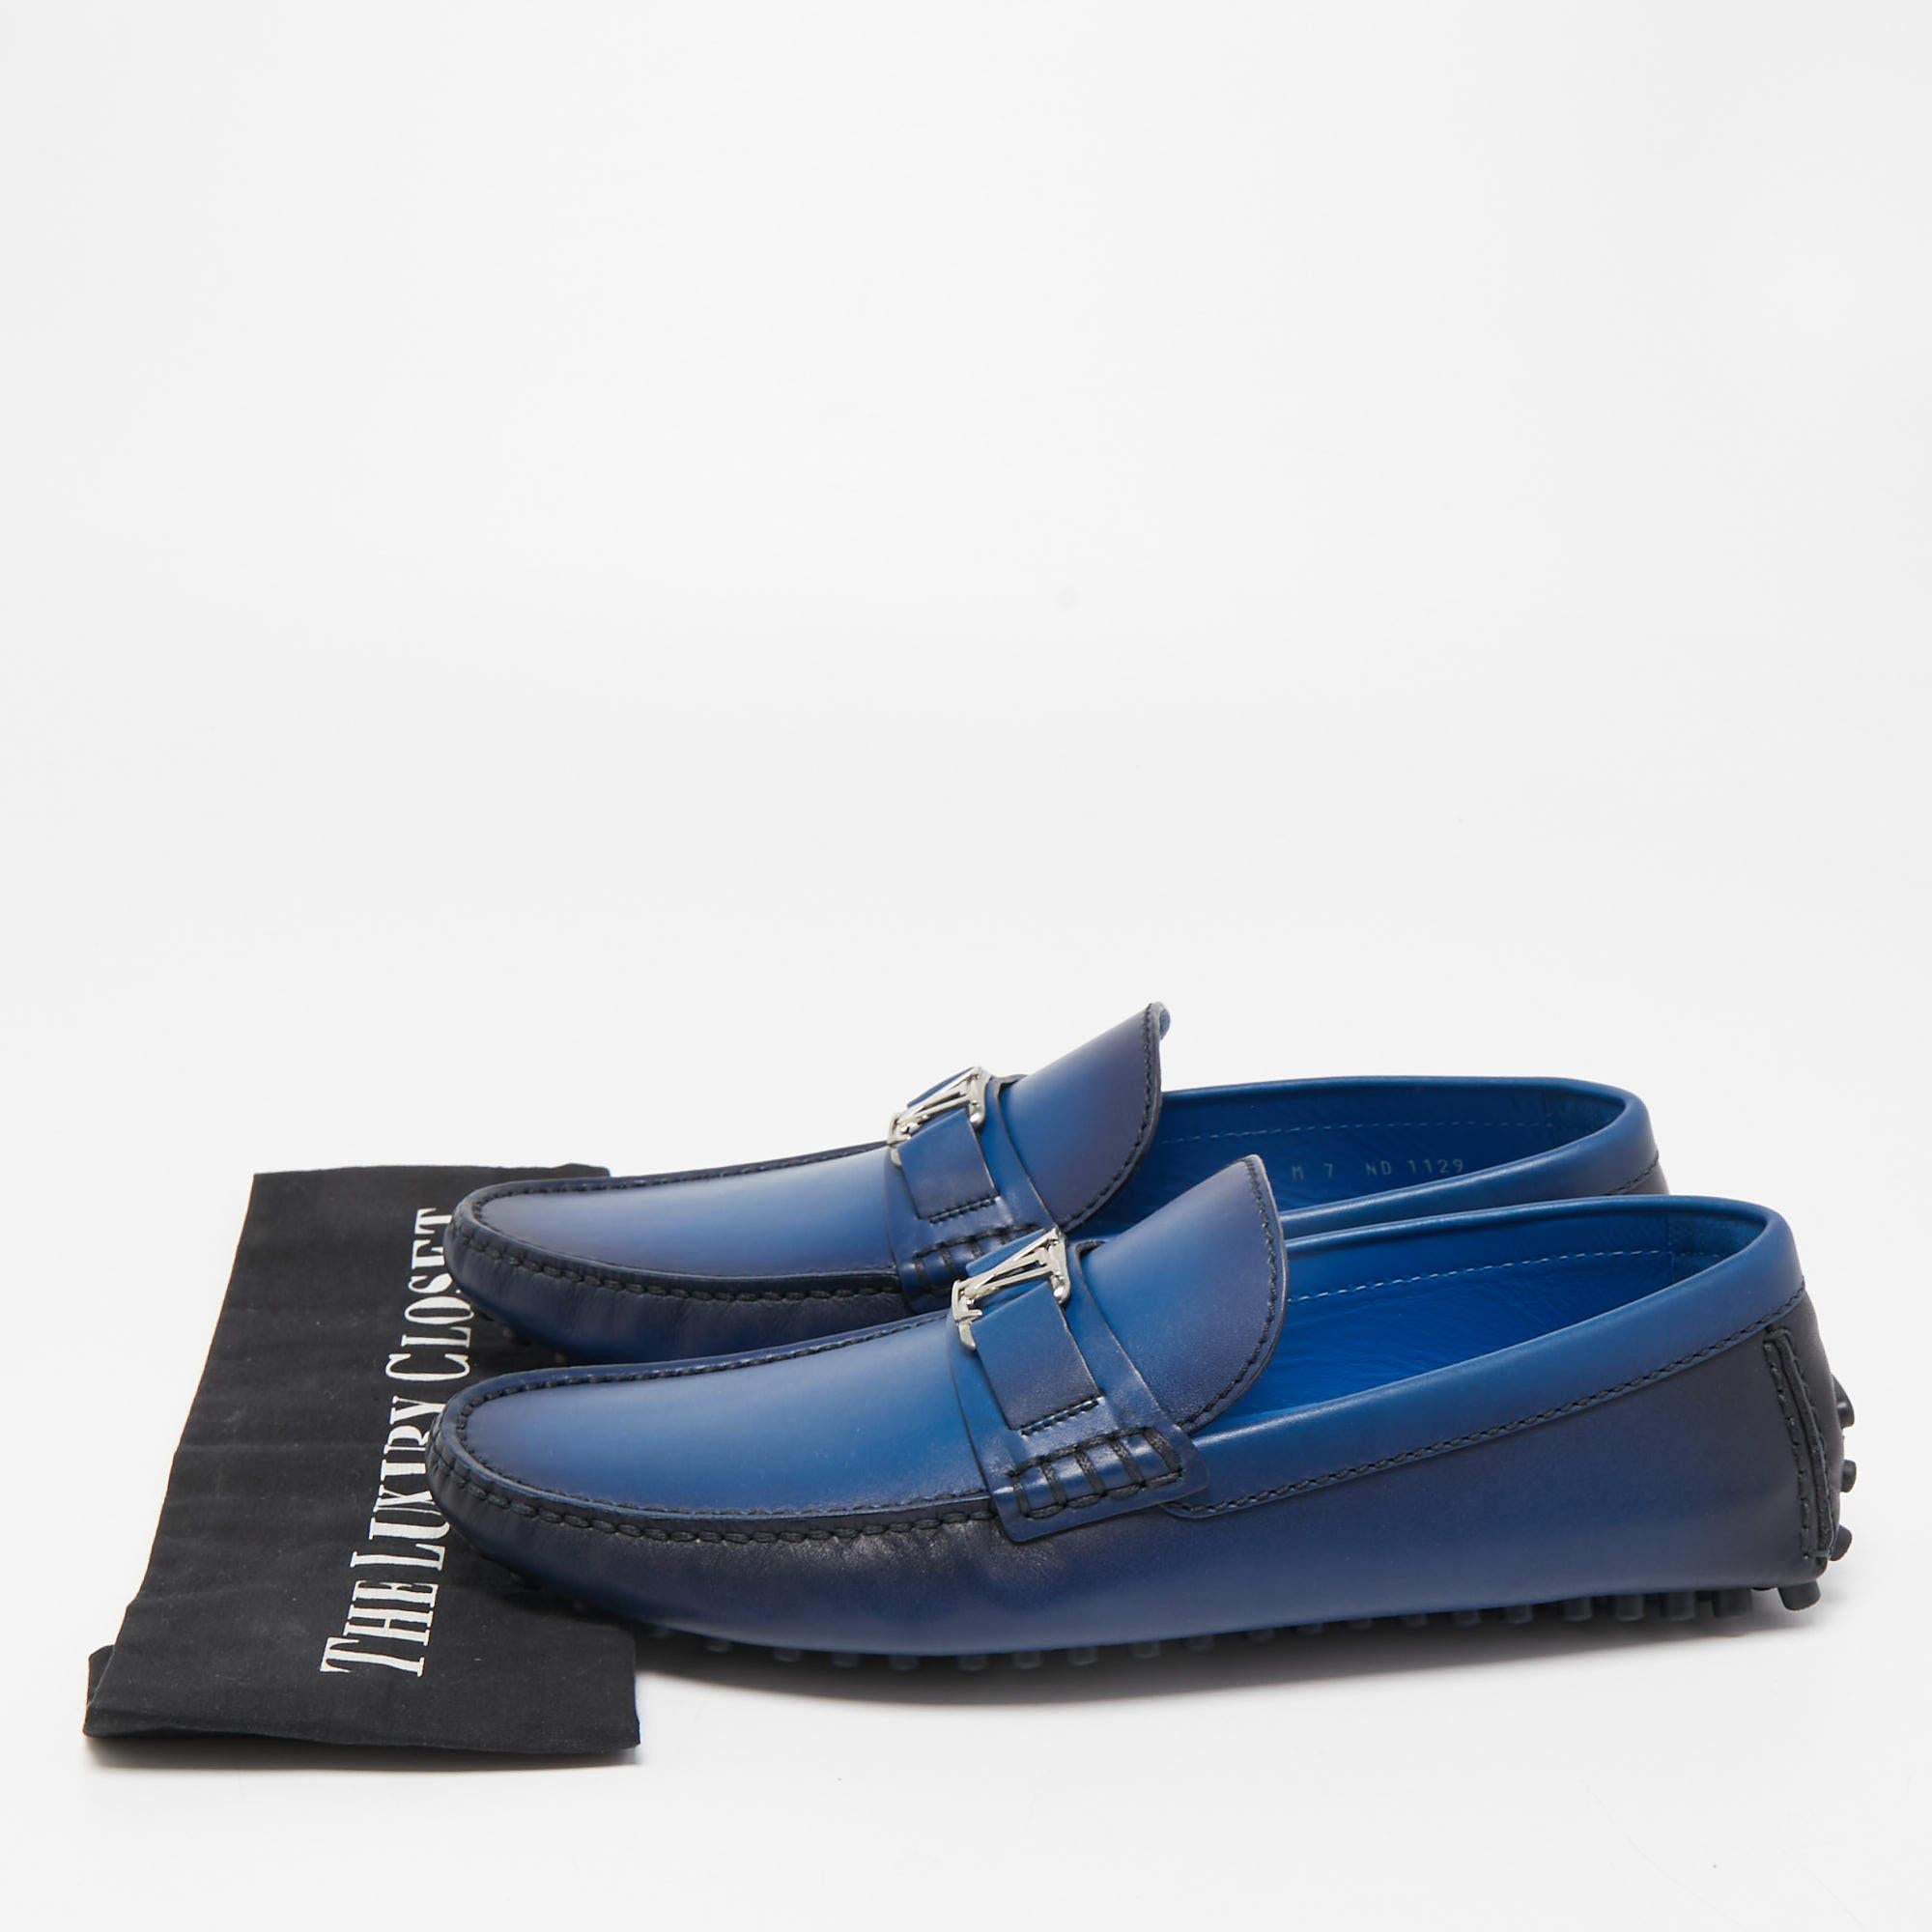 Louis Vuitton Ombre Blue Leather Hockenheim Slip On Loafers Size 41 5